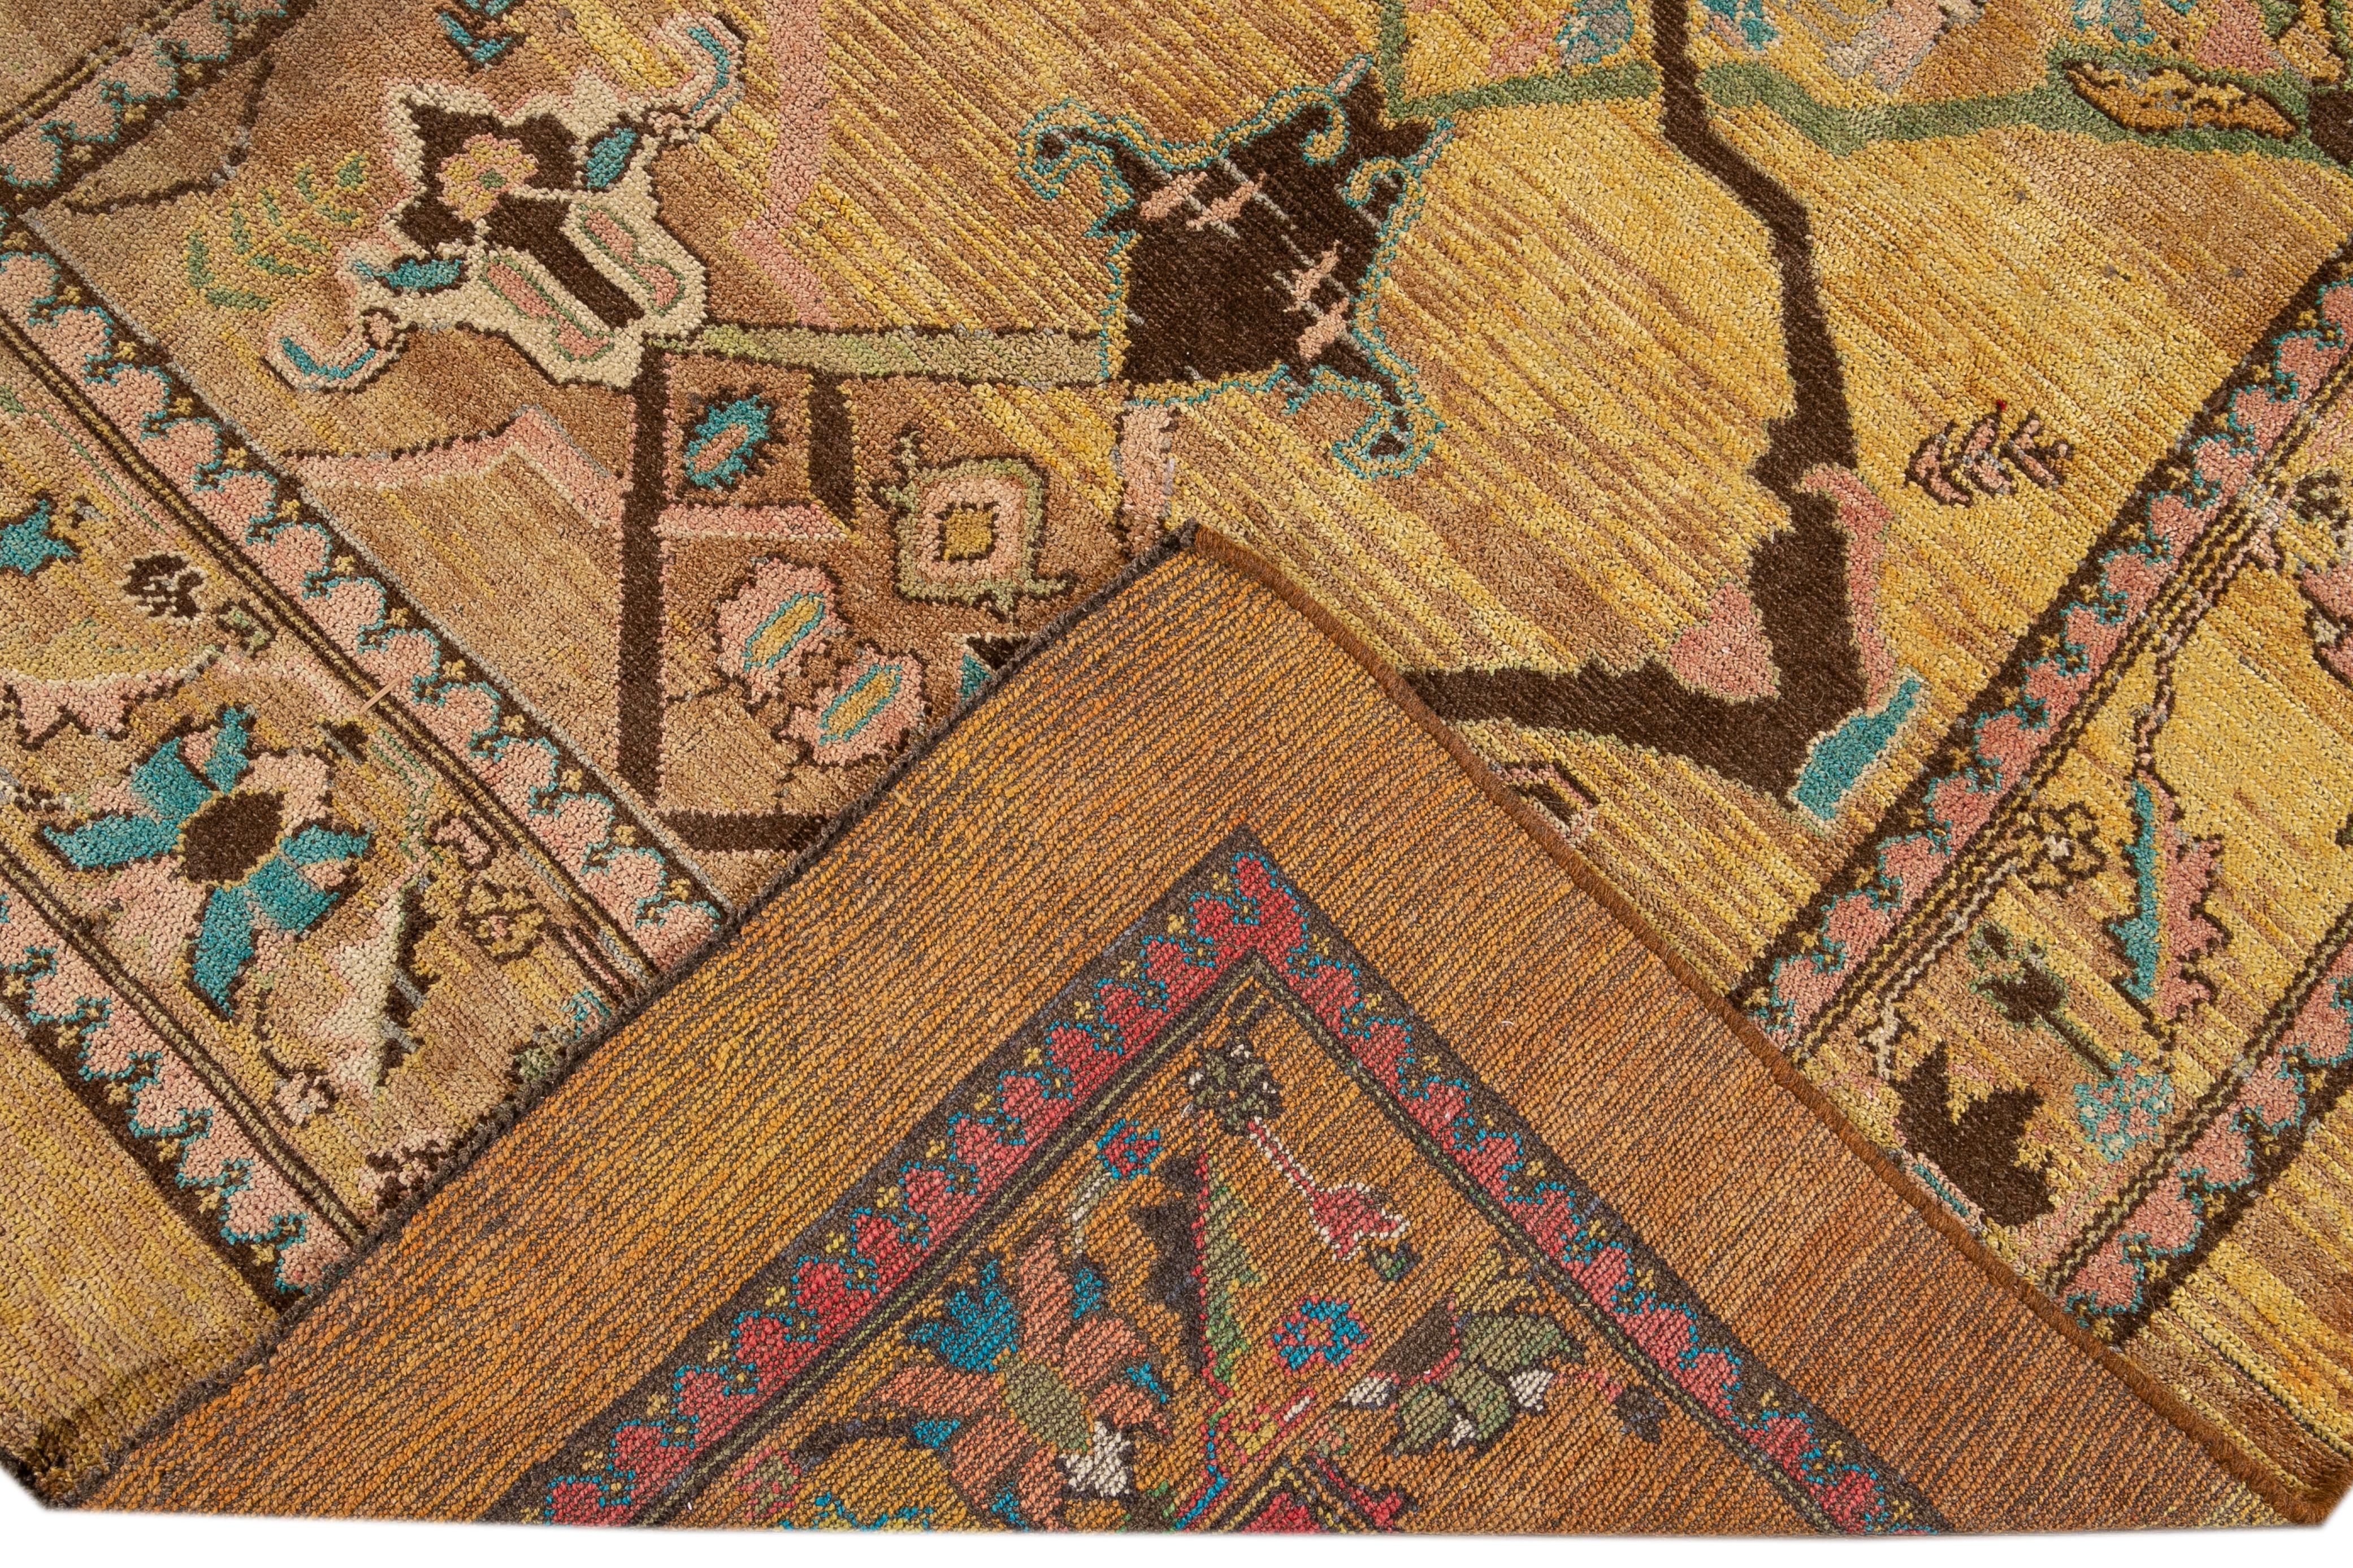 Beautiful modern hand-knotted wool rug with a yellow field. This Revival Collection rug has blue, pink, brown, and green accents all-over a gorgeous geometric Botanical Floral design.

This rug measures 6'3